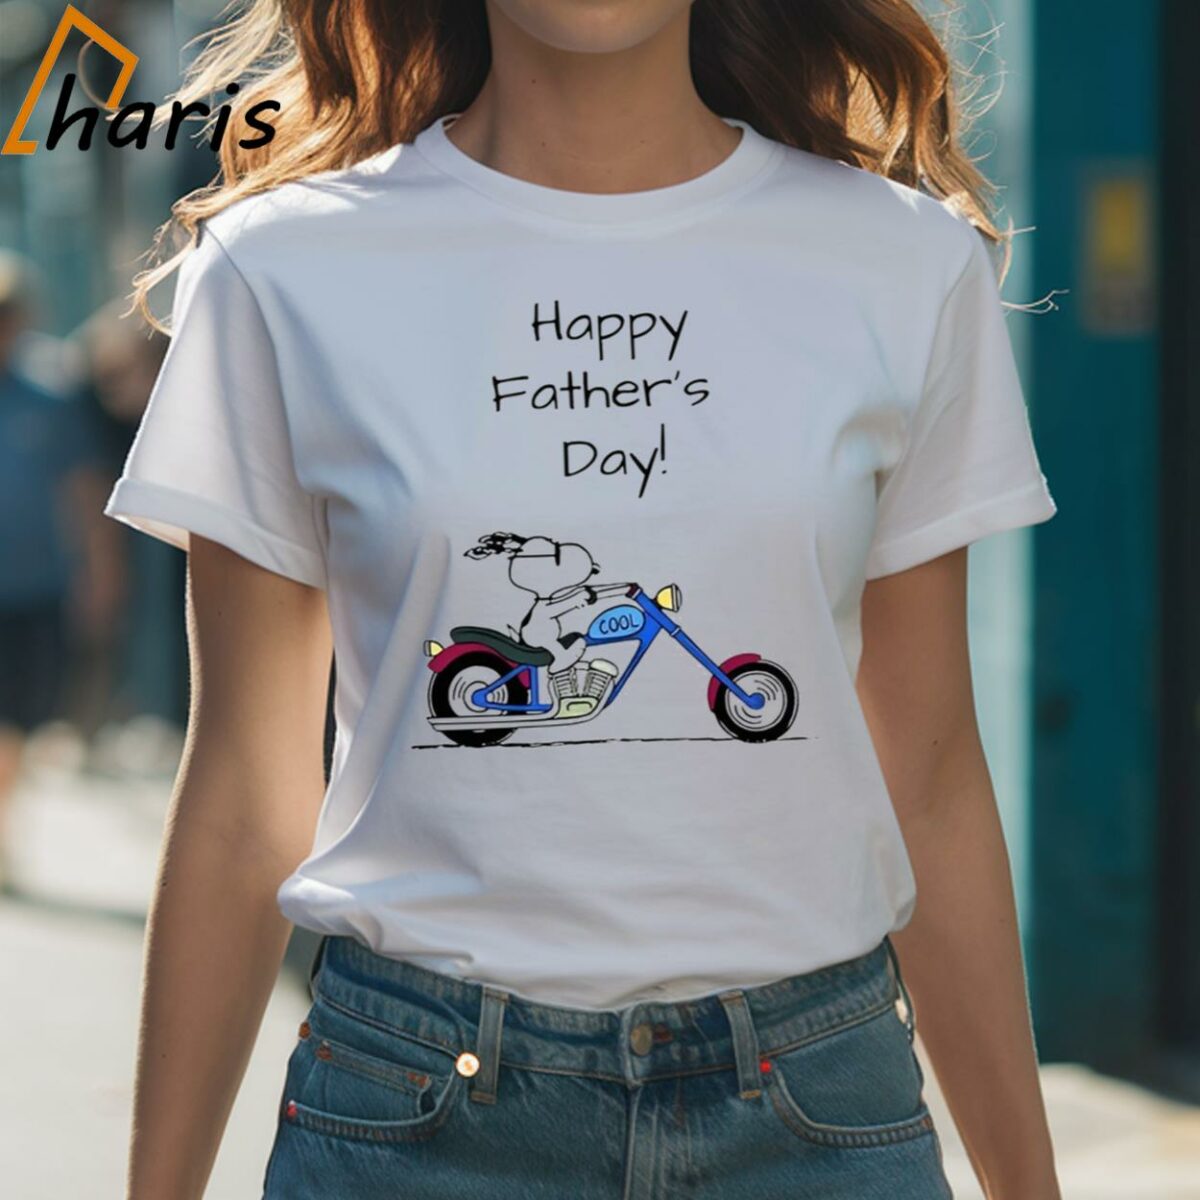 Happy Father's Day Snoopy Joe Cool Dad Motorcycle Shirt 1 Shirt